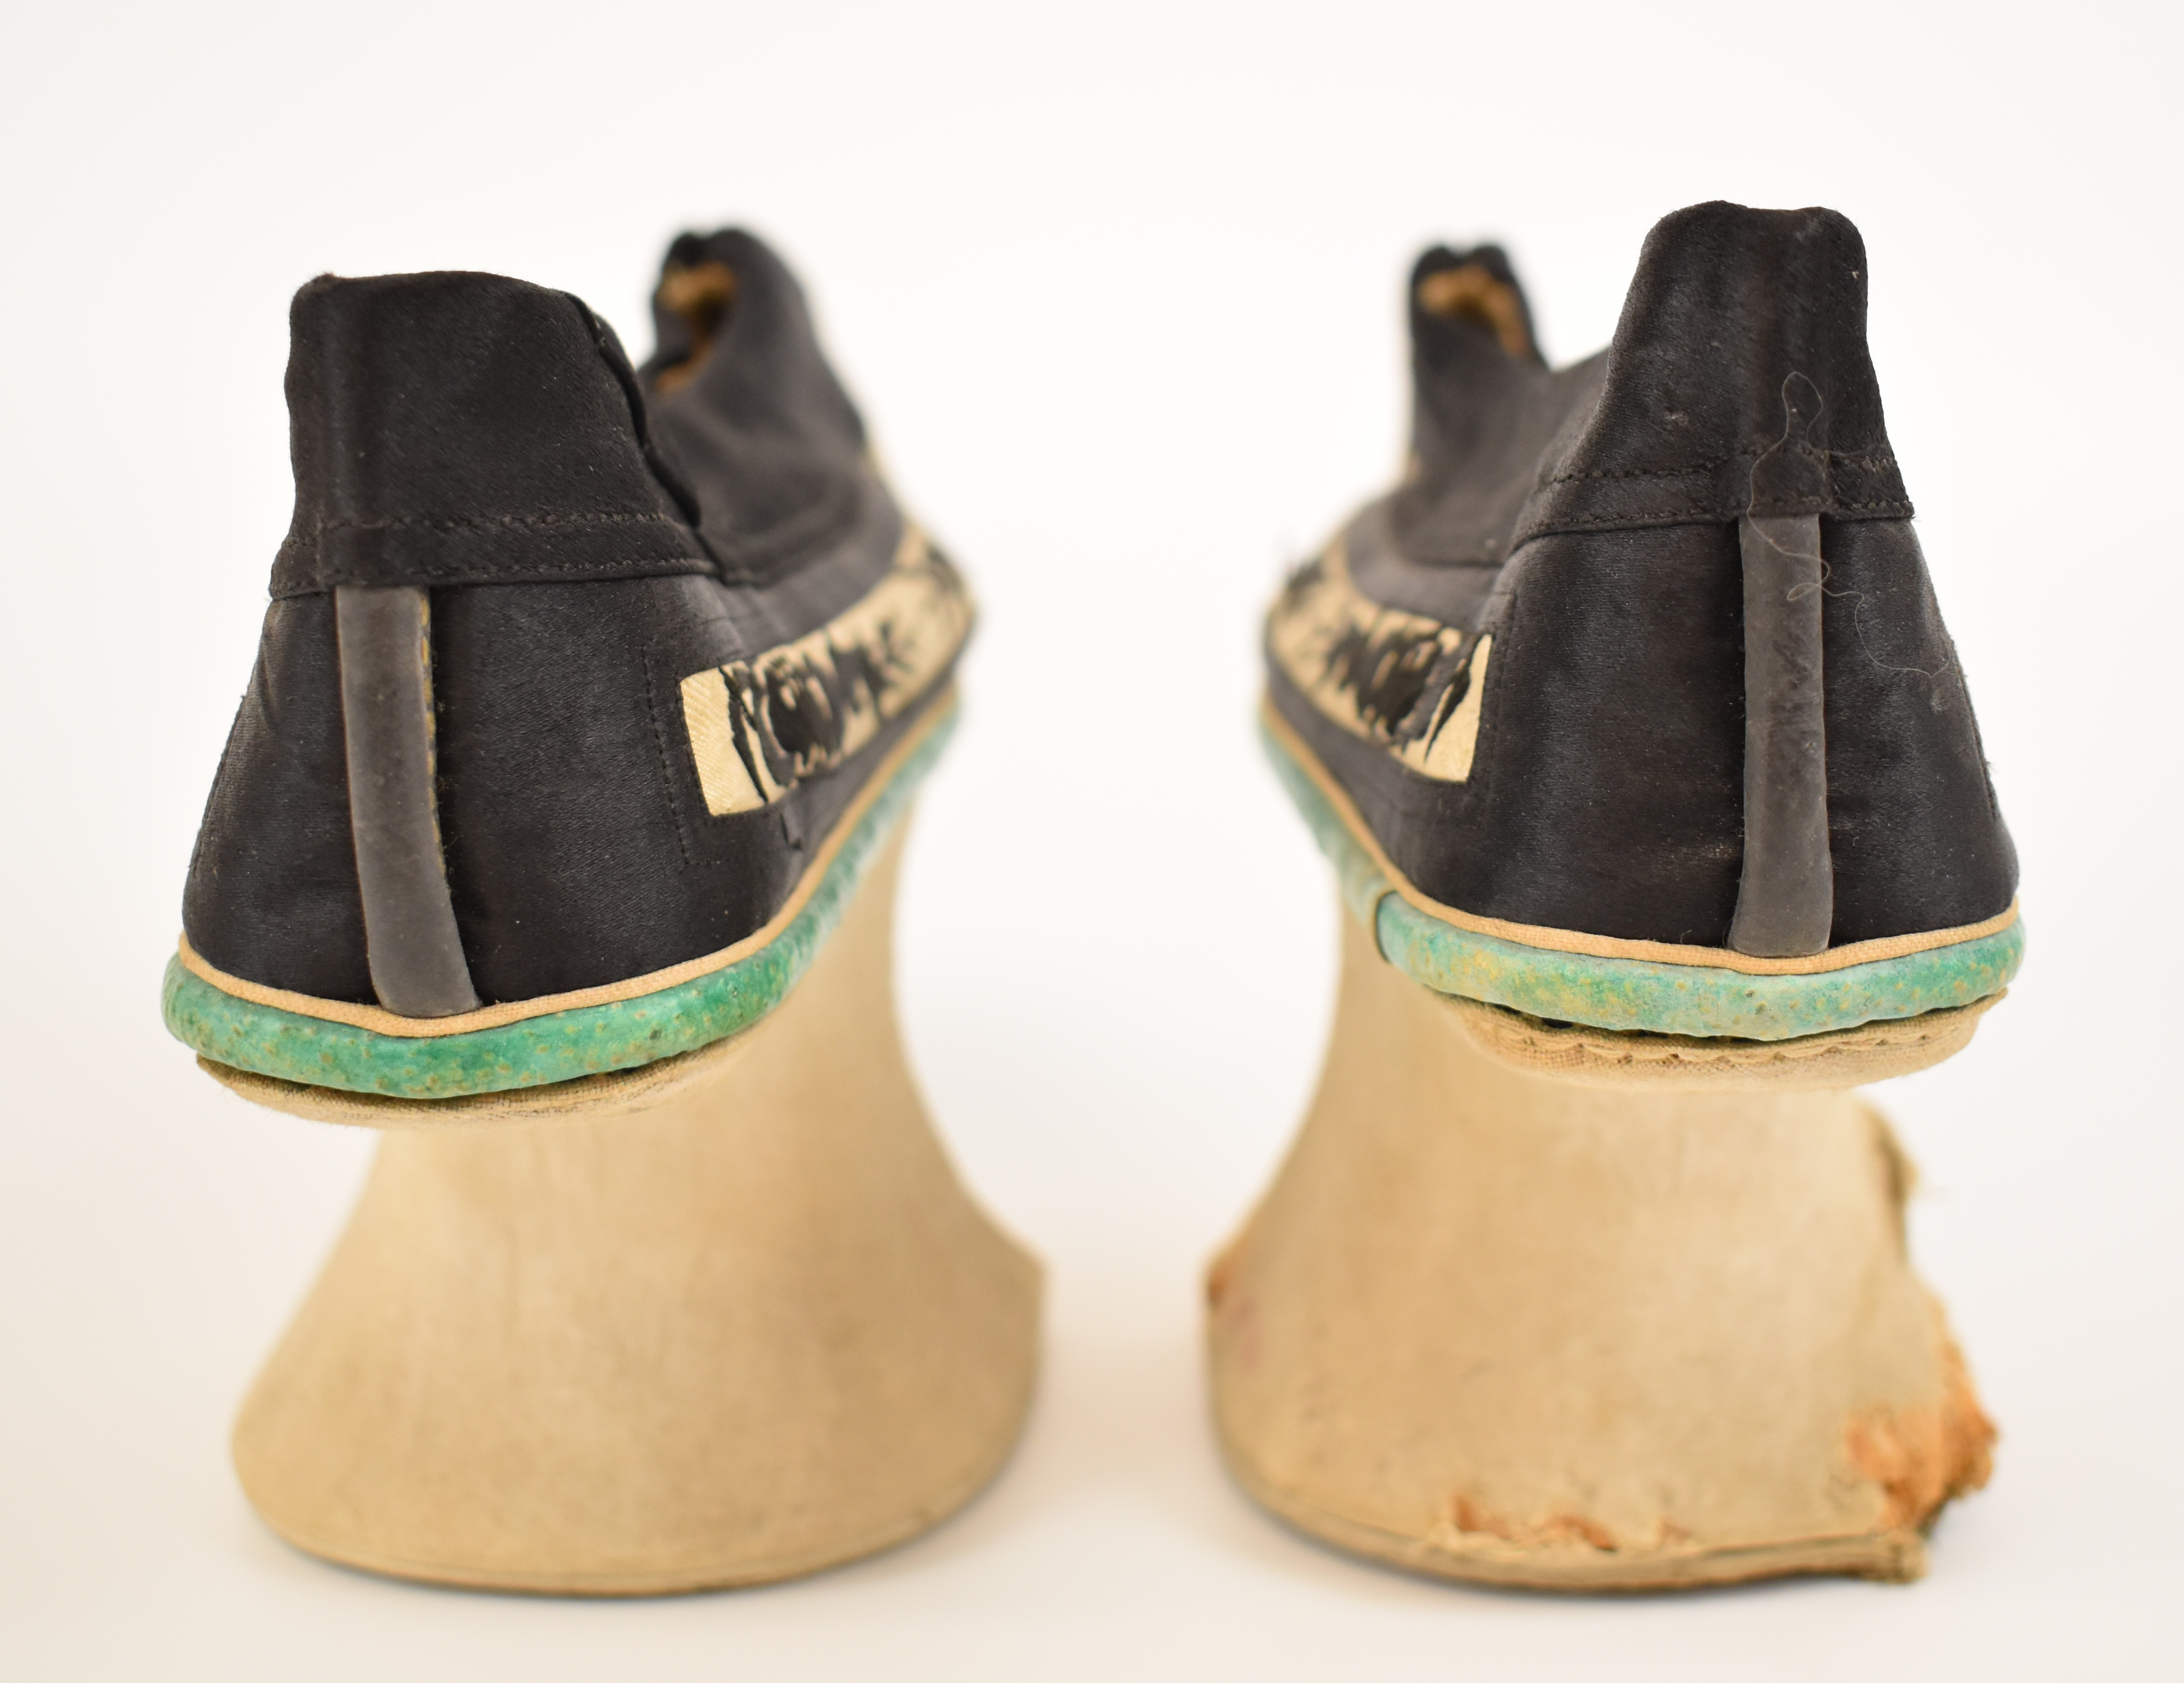 Pair of 19thC Chinese embroidered platform shoes, height 31 x length 21cm - Image 3 of 7